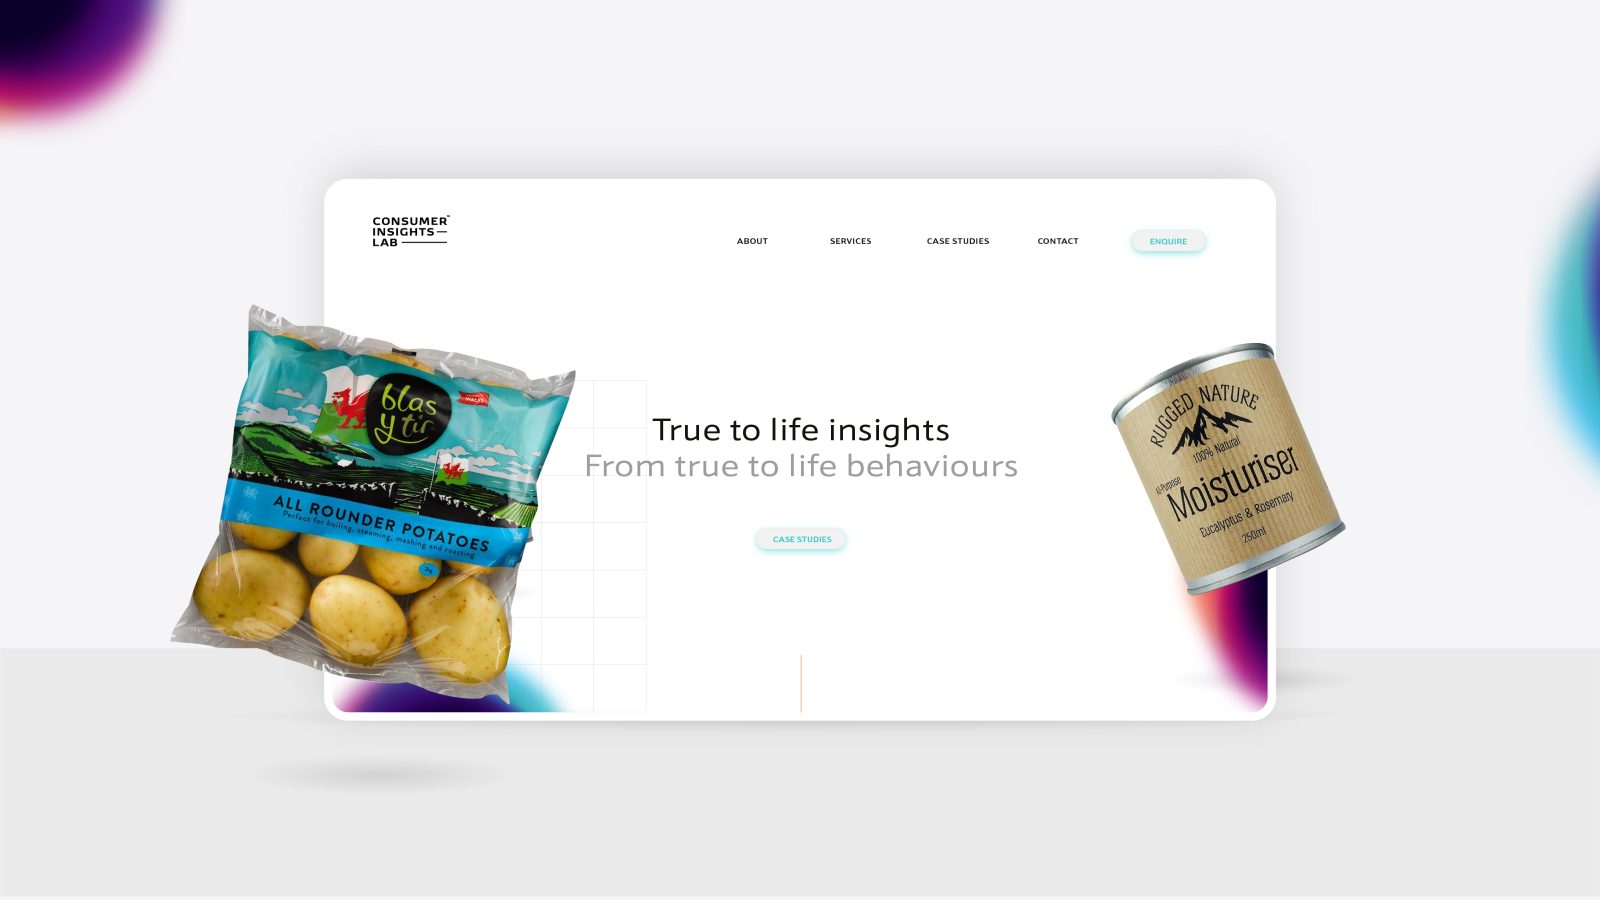 A website interface with a minimalist brand design featuring a bag of potatoes labeled 